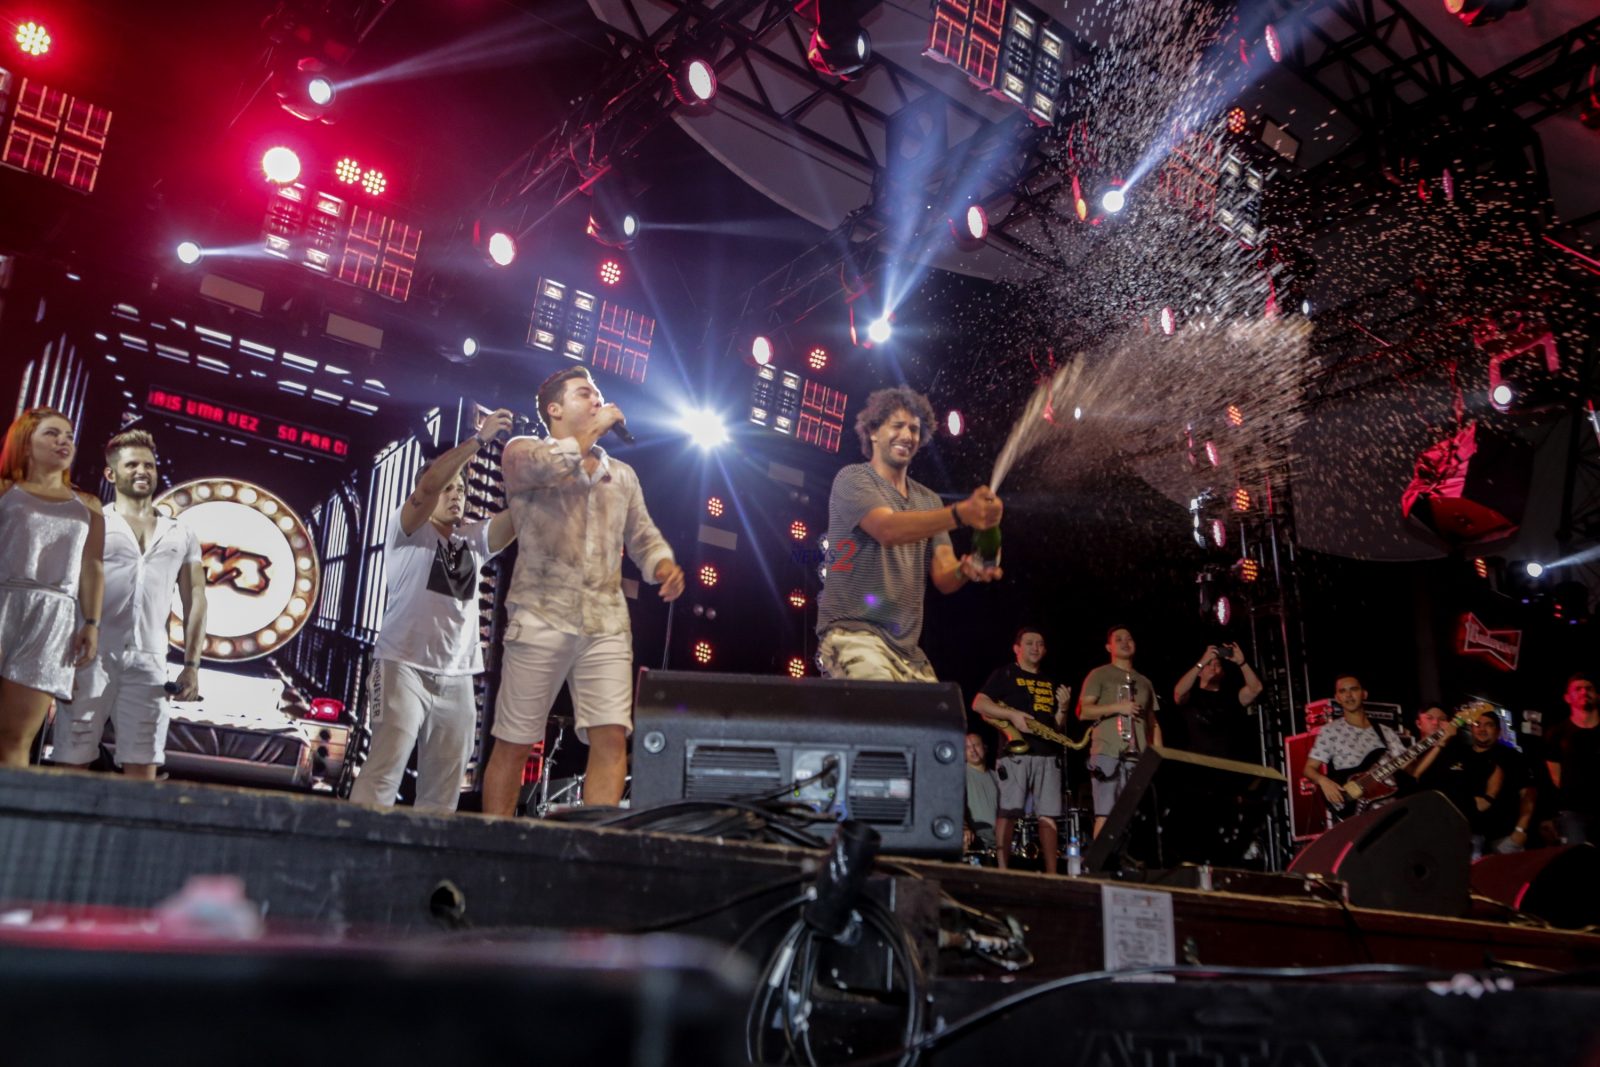 Wesley Safadao And Others Performed At New Year Celebration in Florianópolis-Brazil